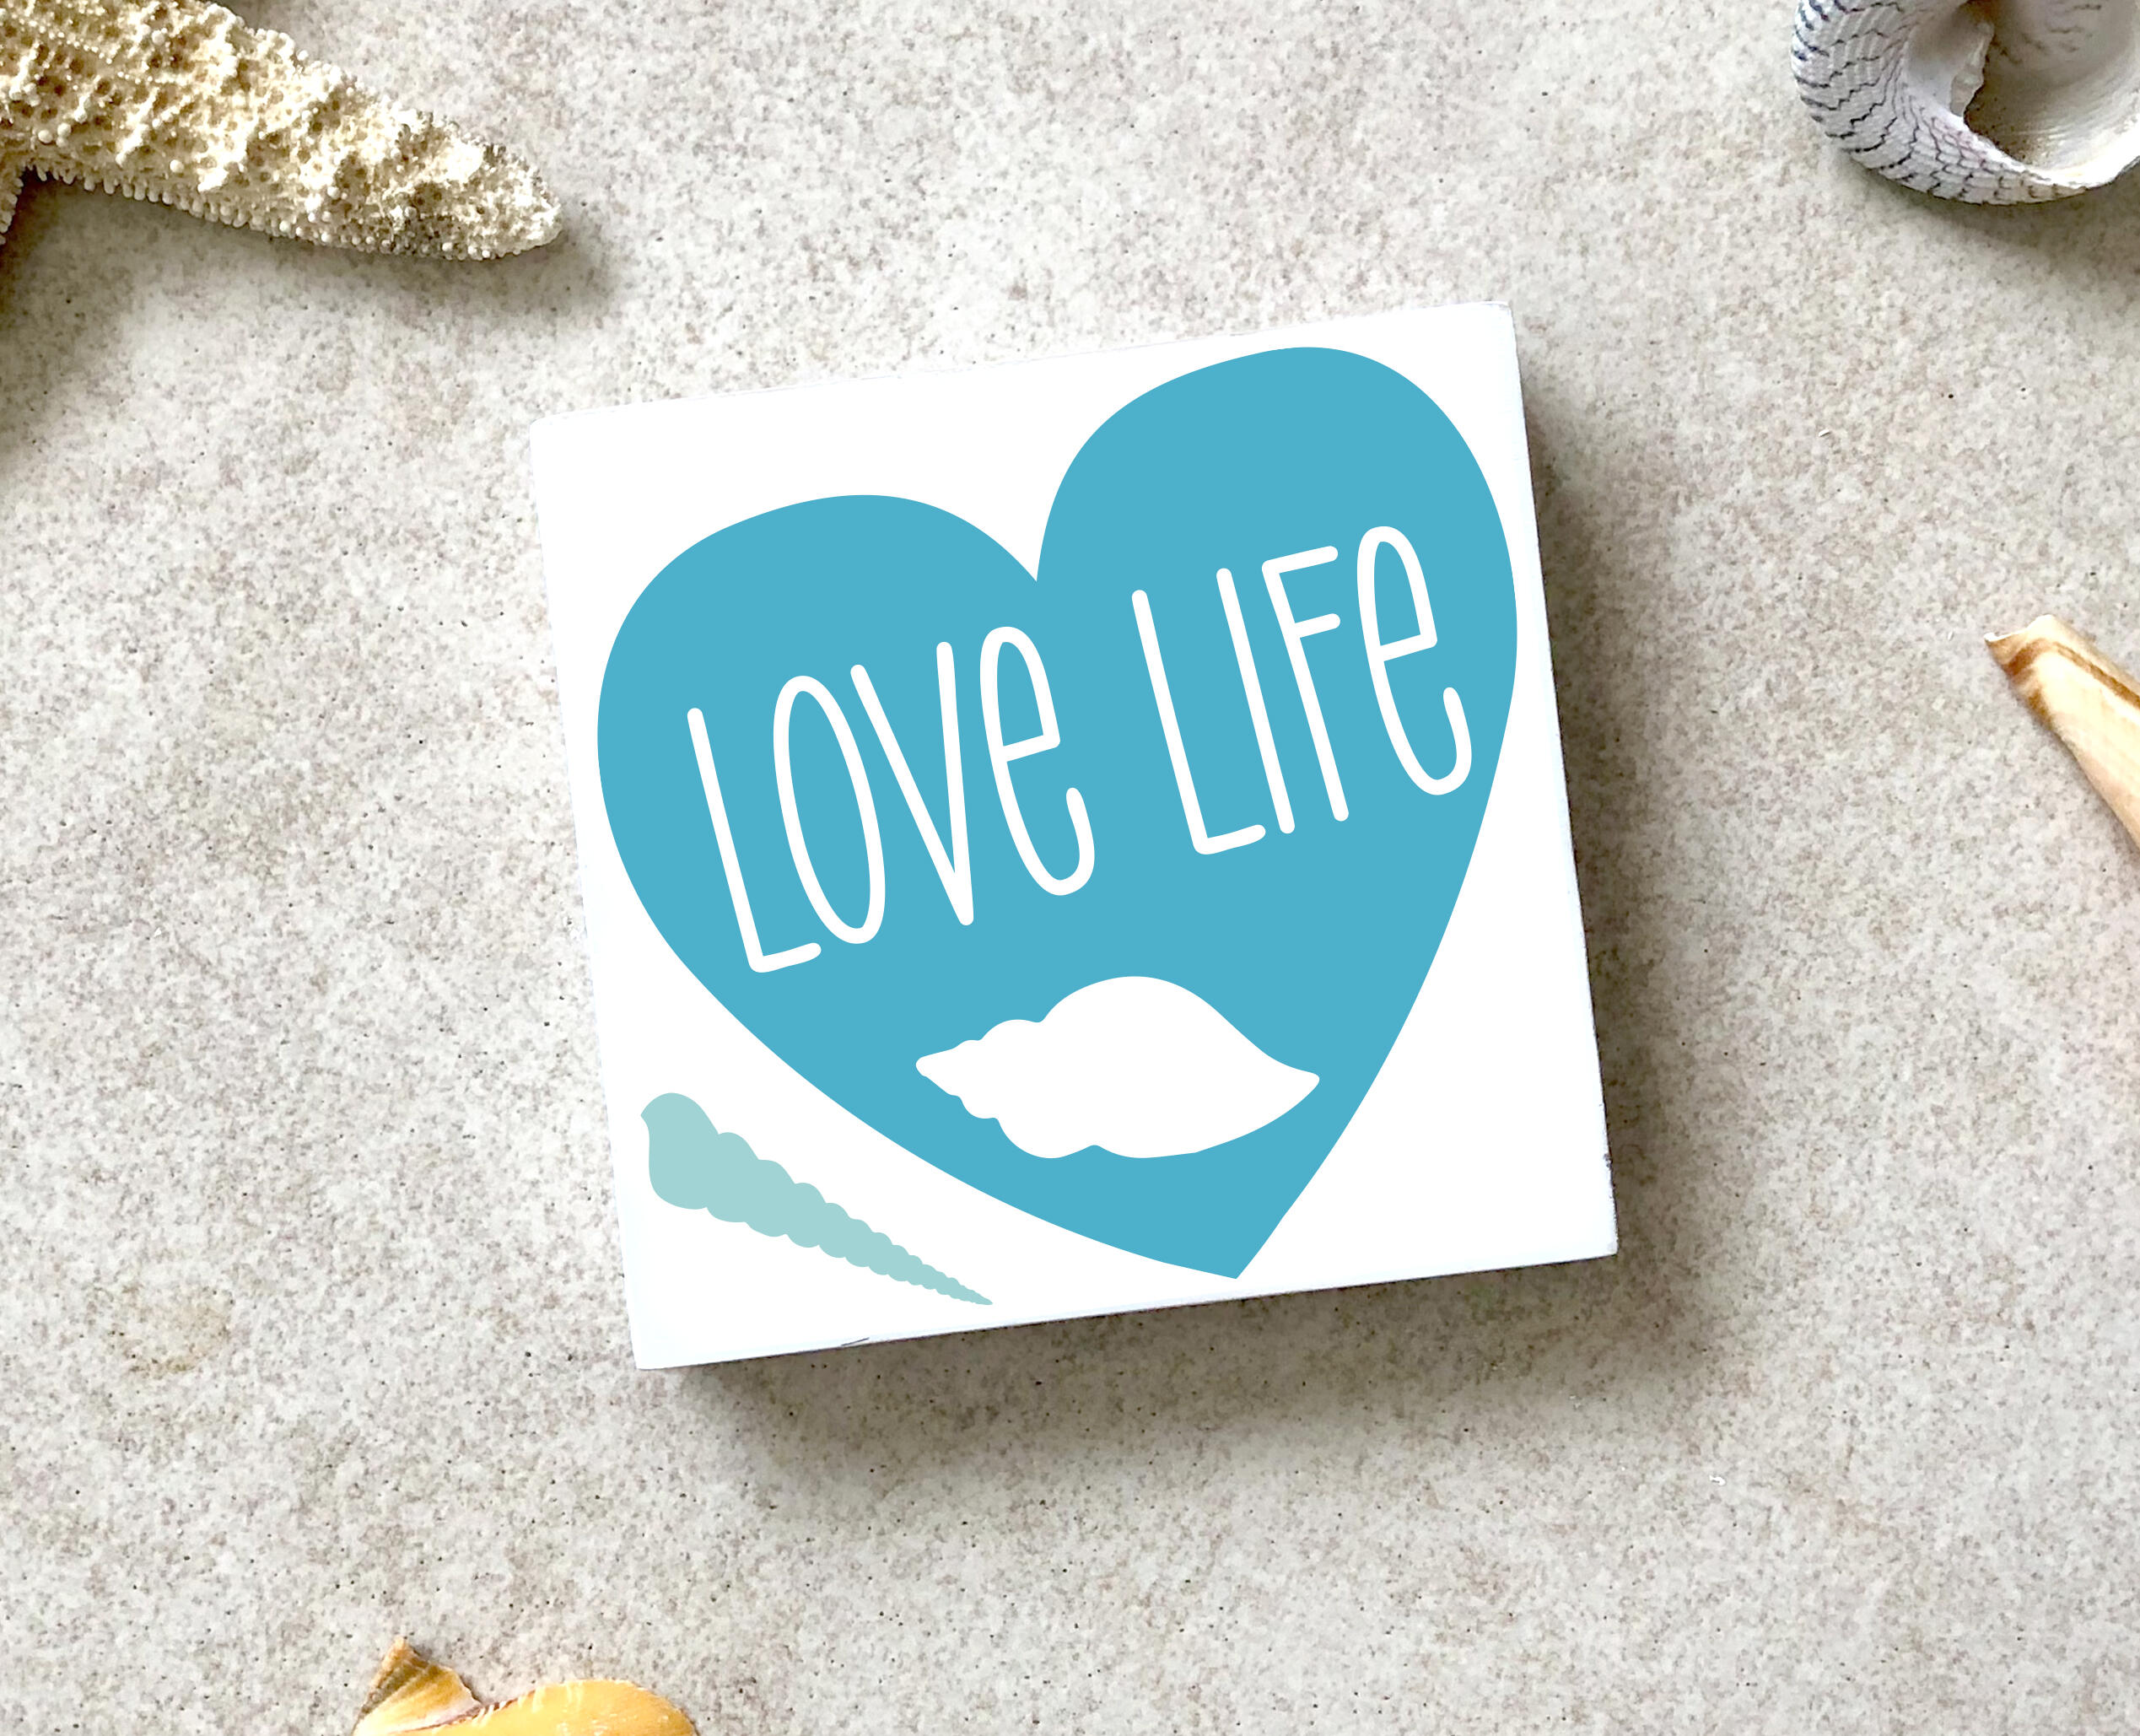 Coastal Valentines Day Signs, Love Life, Blessed, Together